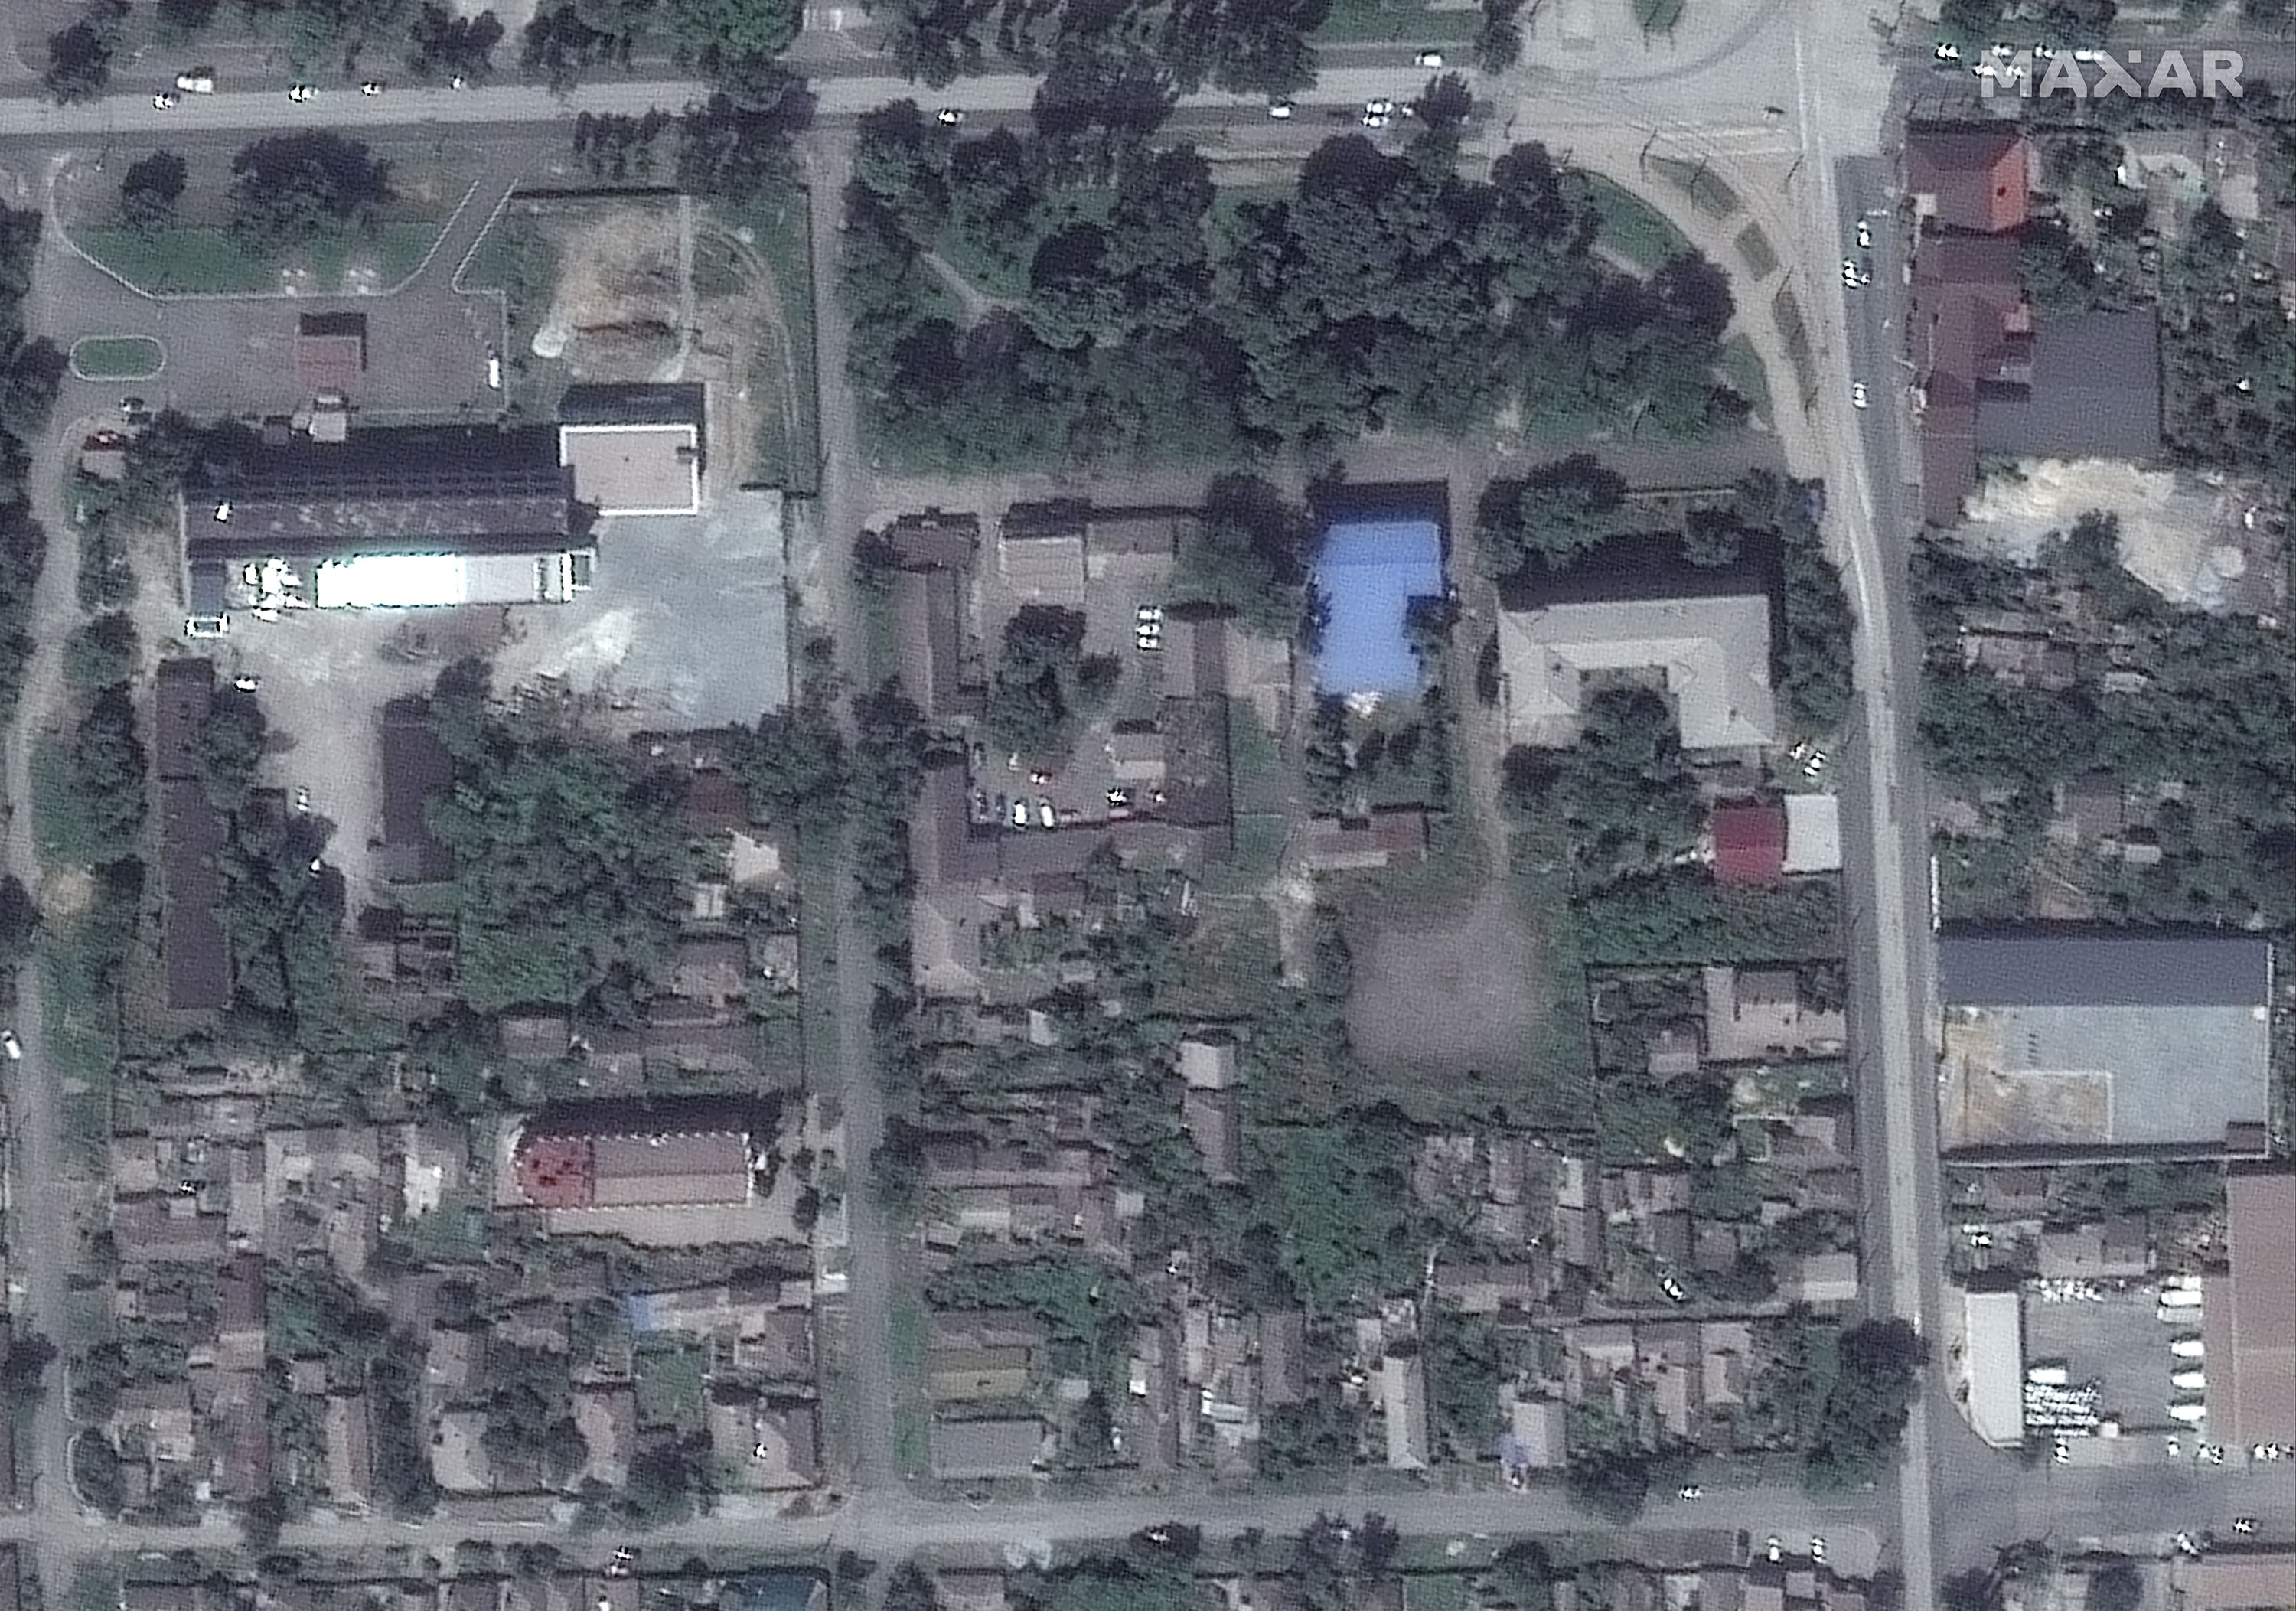 Buildings and homes in central Mariupol are seen in this image taken in June 2021.